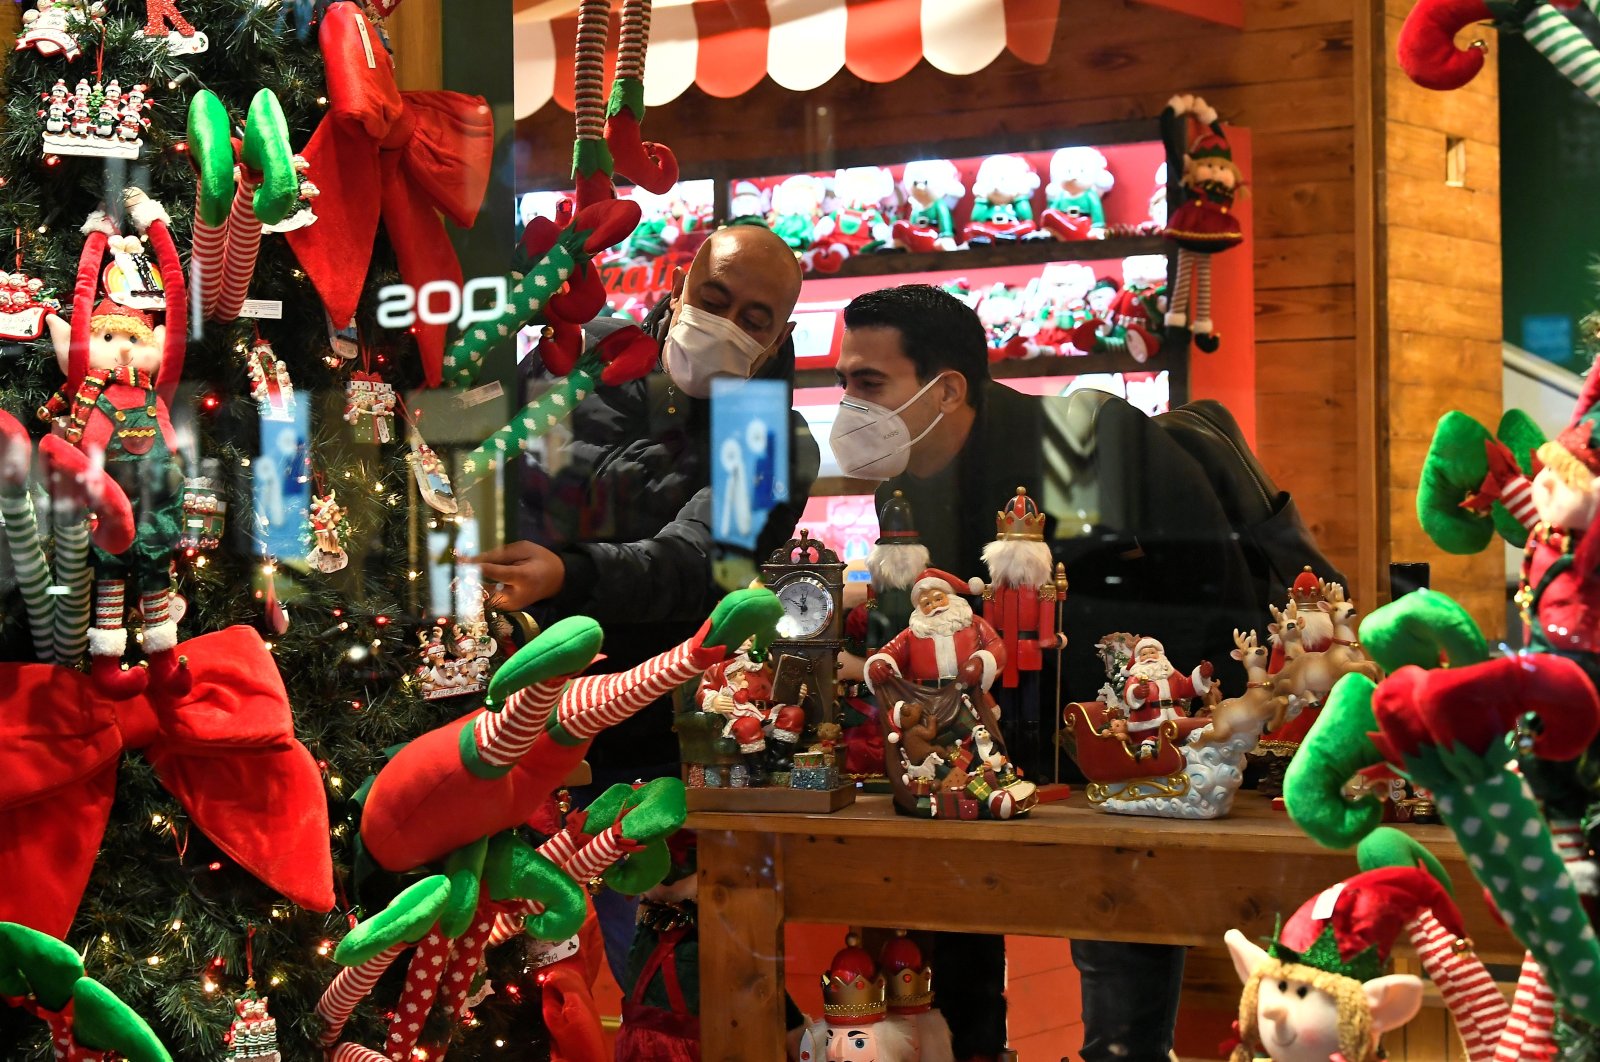 People go shopping after nonessential shops reopen ahead of Christmas, in Milan, Italy, Dec. 1, 2020. (REUTERS Photo)